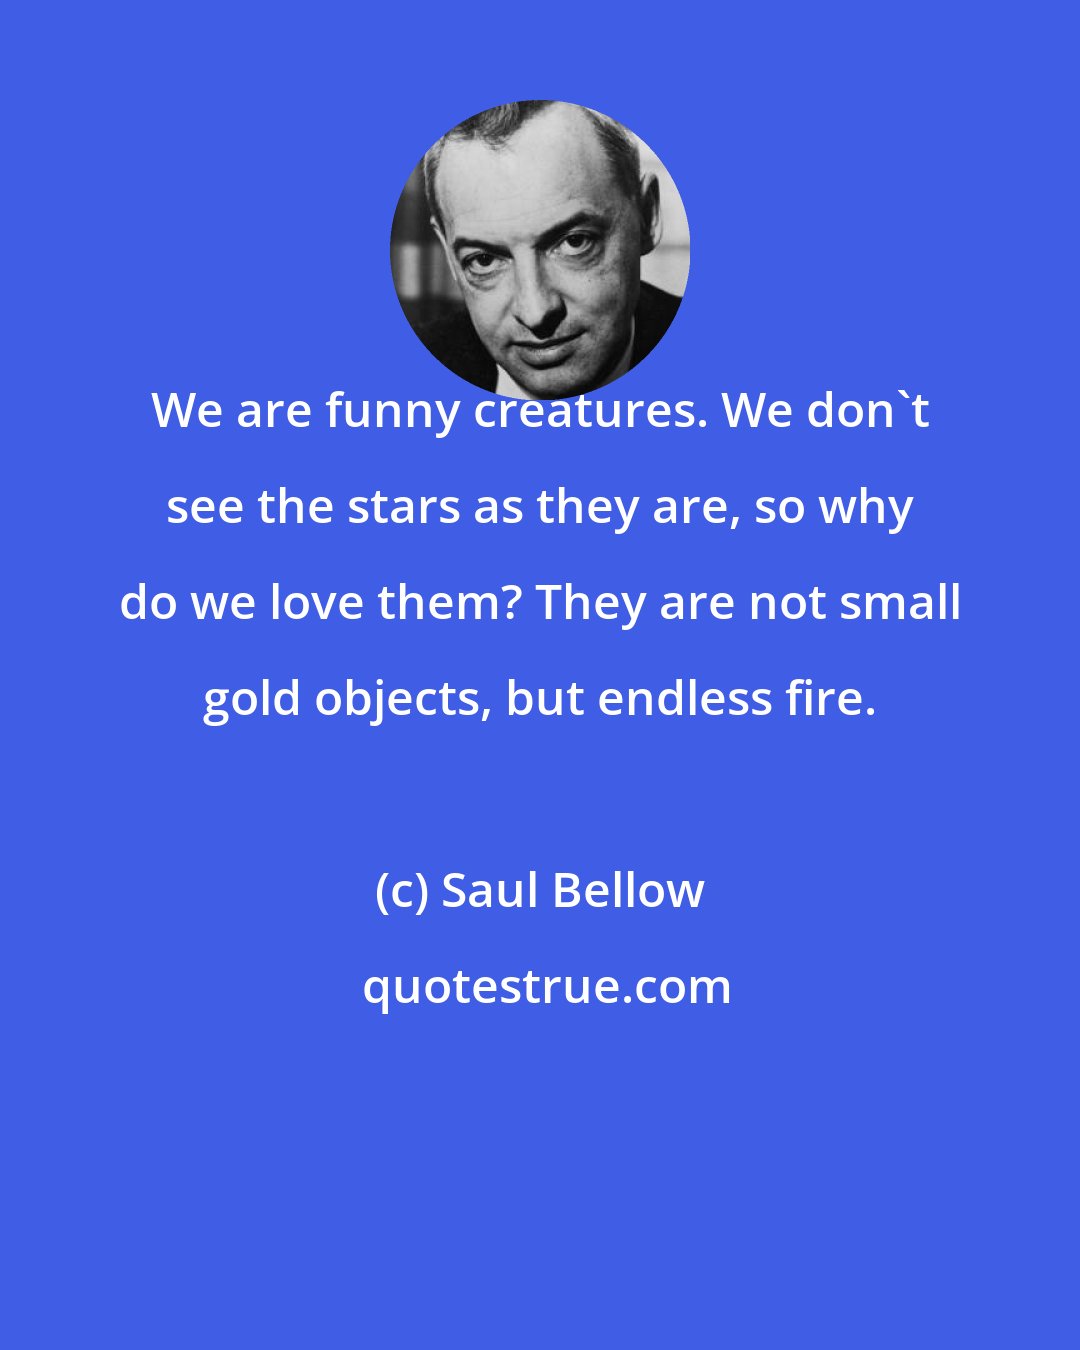 Saul Bellow: We are funny creatures. We don't see the stars as they are, so why do we love them? They are not small gold objects, but endless fire.